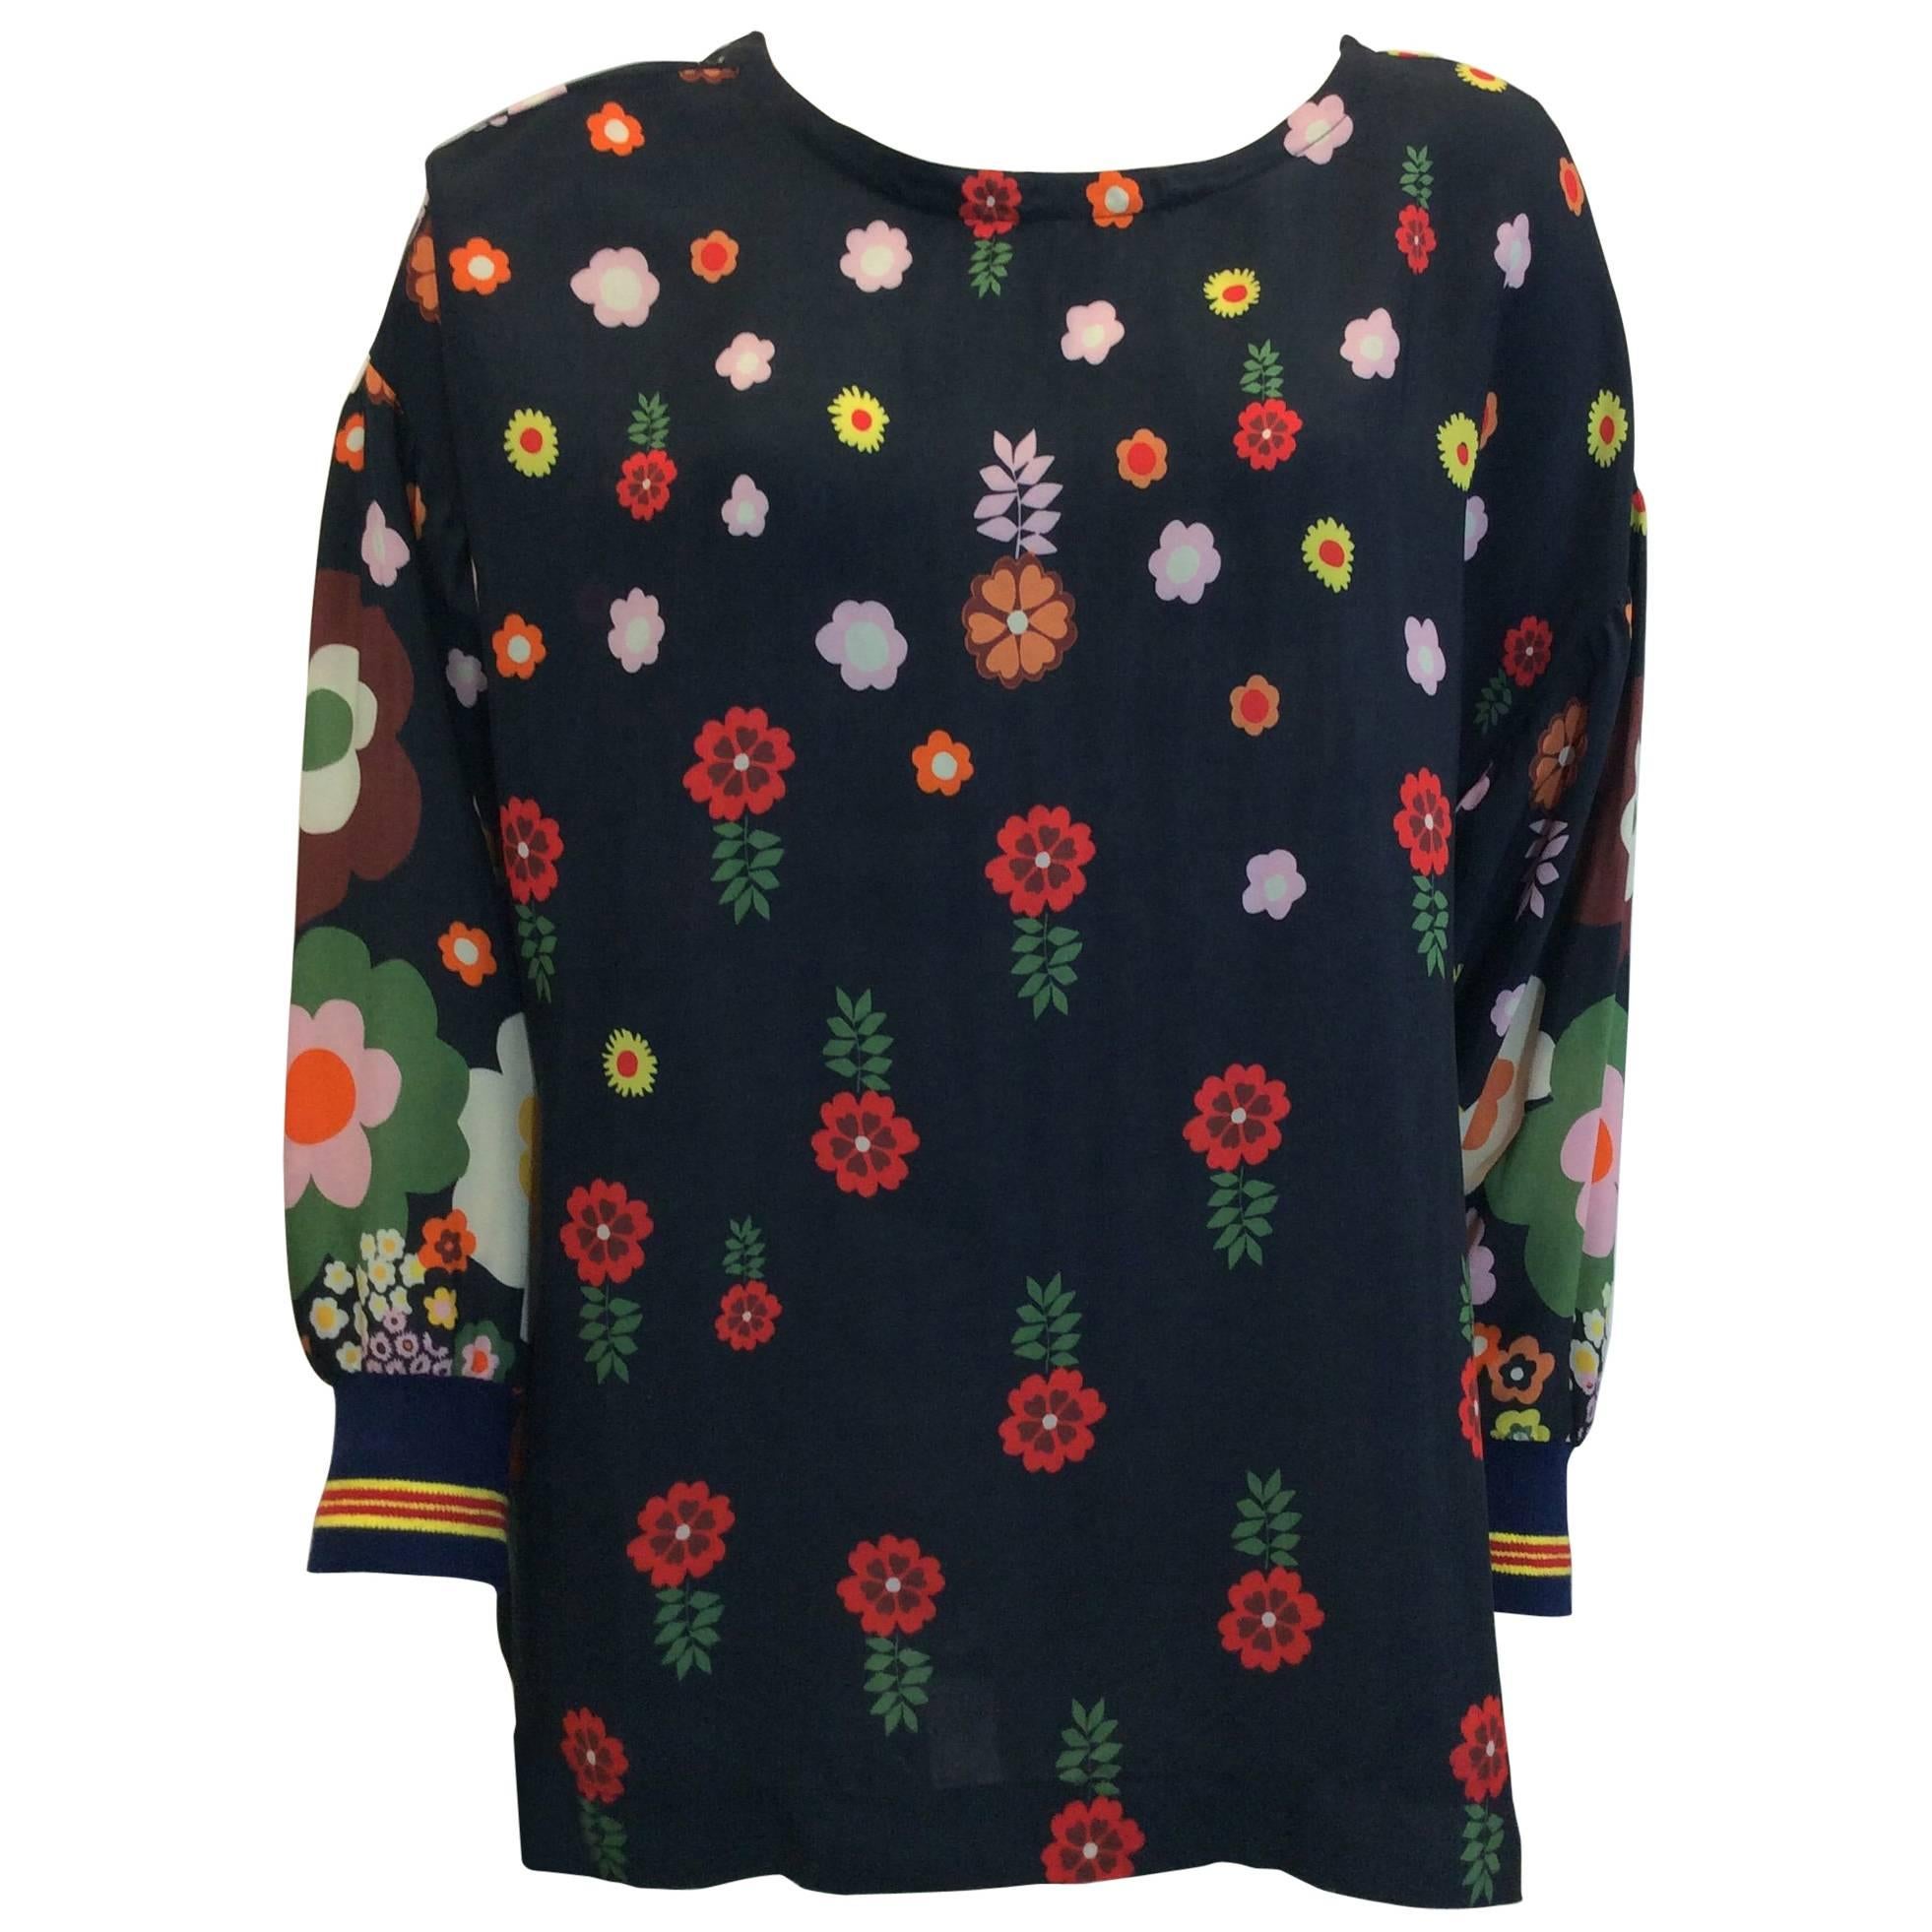 Warm Floral Printed Long Sleeve Blouse For Sale